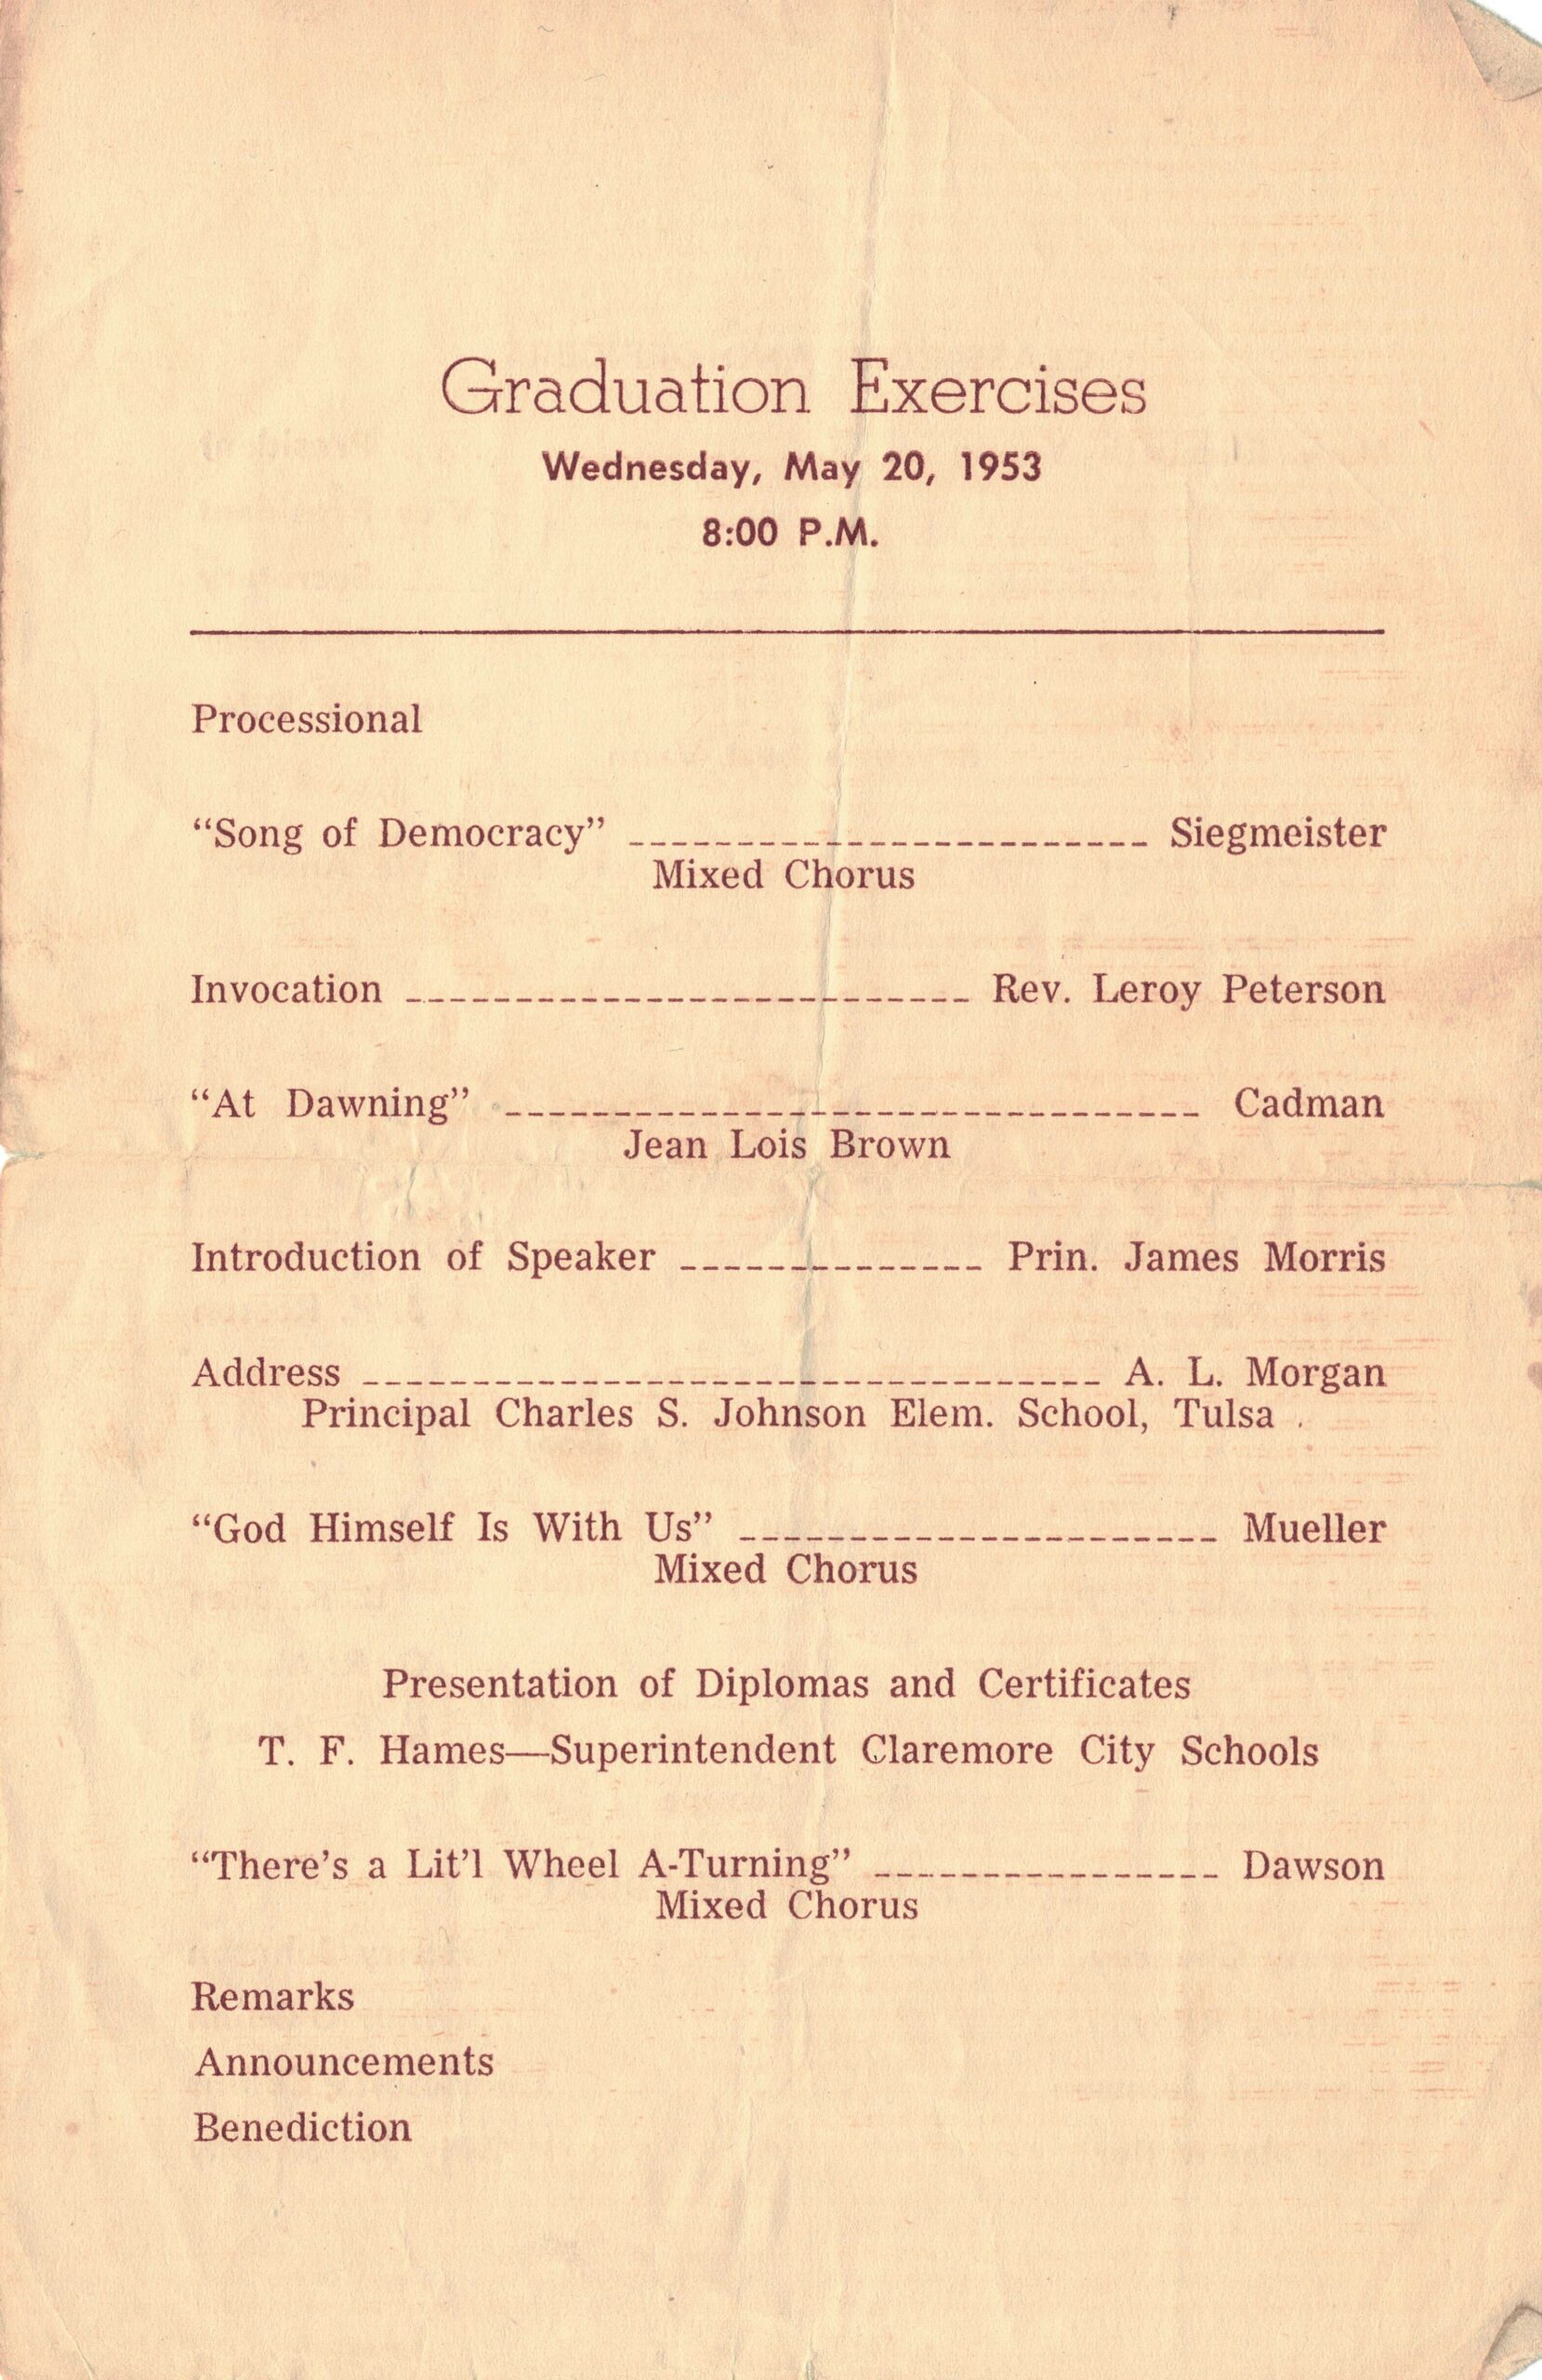 Third page of the 1953 Lincoln commmencement program detailing the order of events for the graduation exercises.